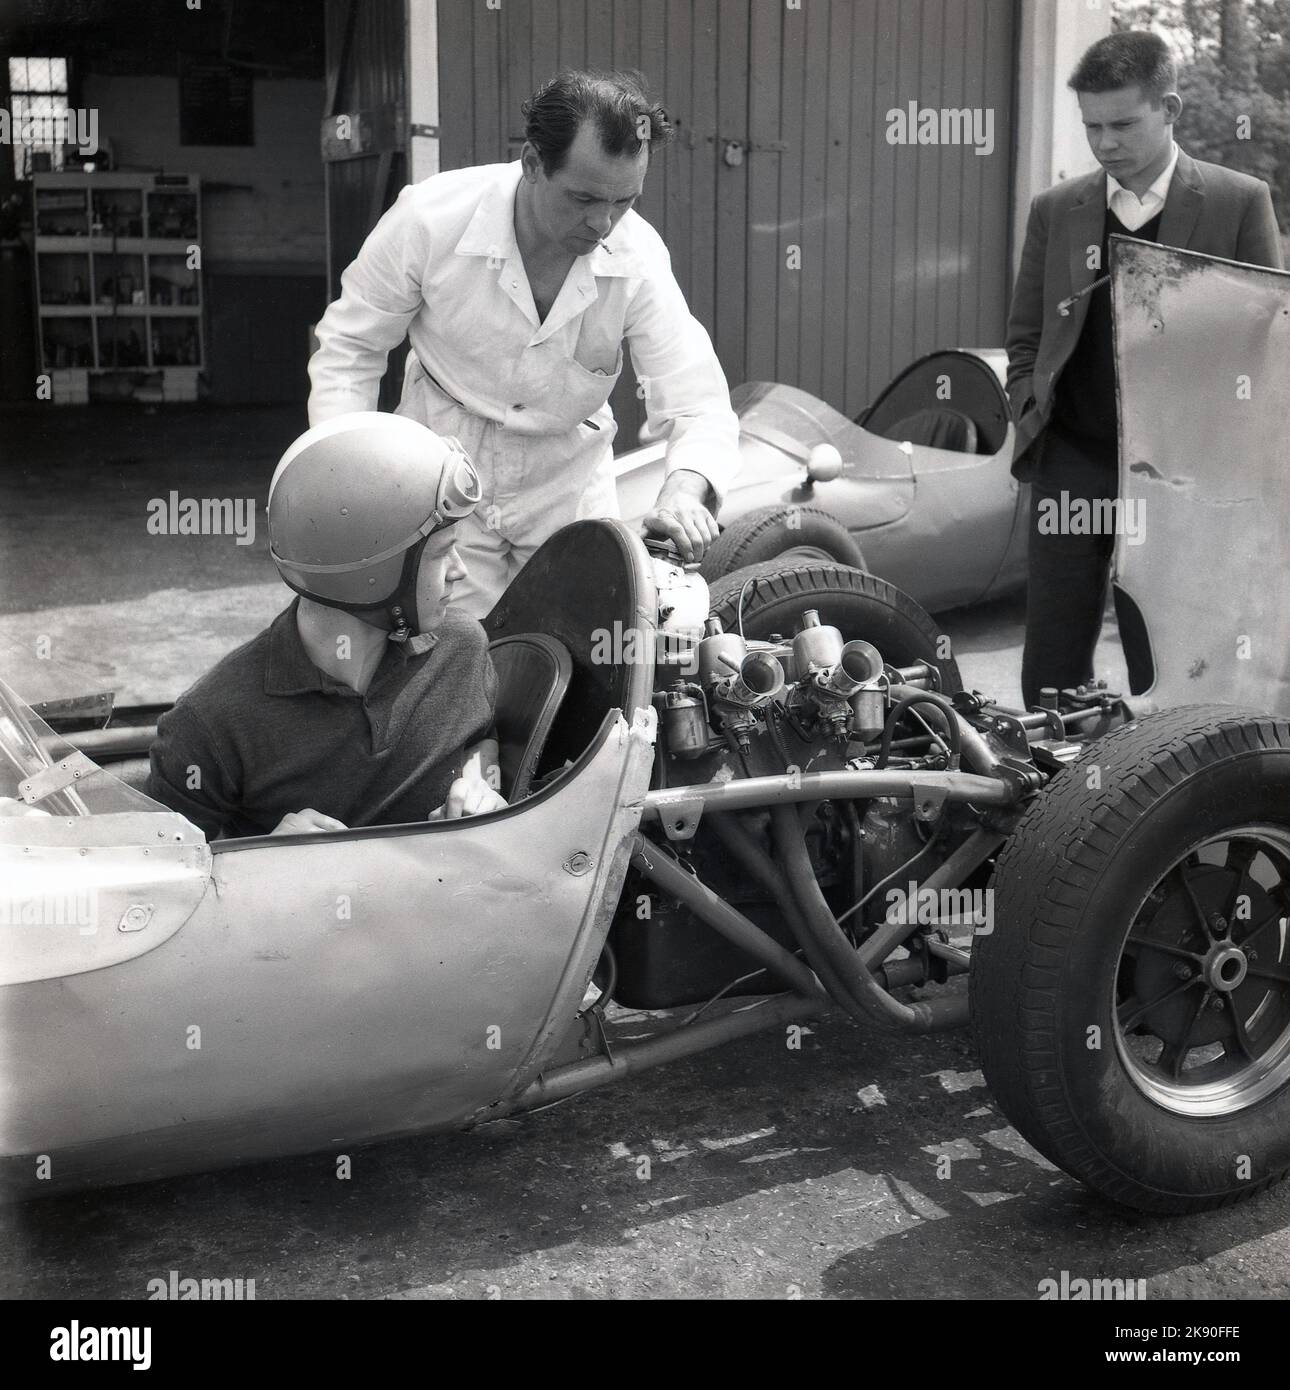 1962, historical, a man sitting in a single-seater racing car with the engine exposed with mechanic at Geoff Clarke’s Motor Racing Stables, a driving school based at the Finmere Aerodome, a disused RAF airfield near to Buckingham, England, UK. The racing school’s 1,000 cc single-seaters were rear-engined Formula Junior Coopers. Stock Photo